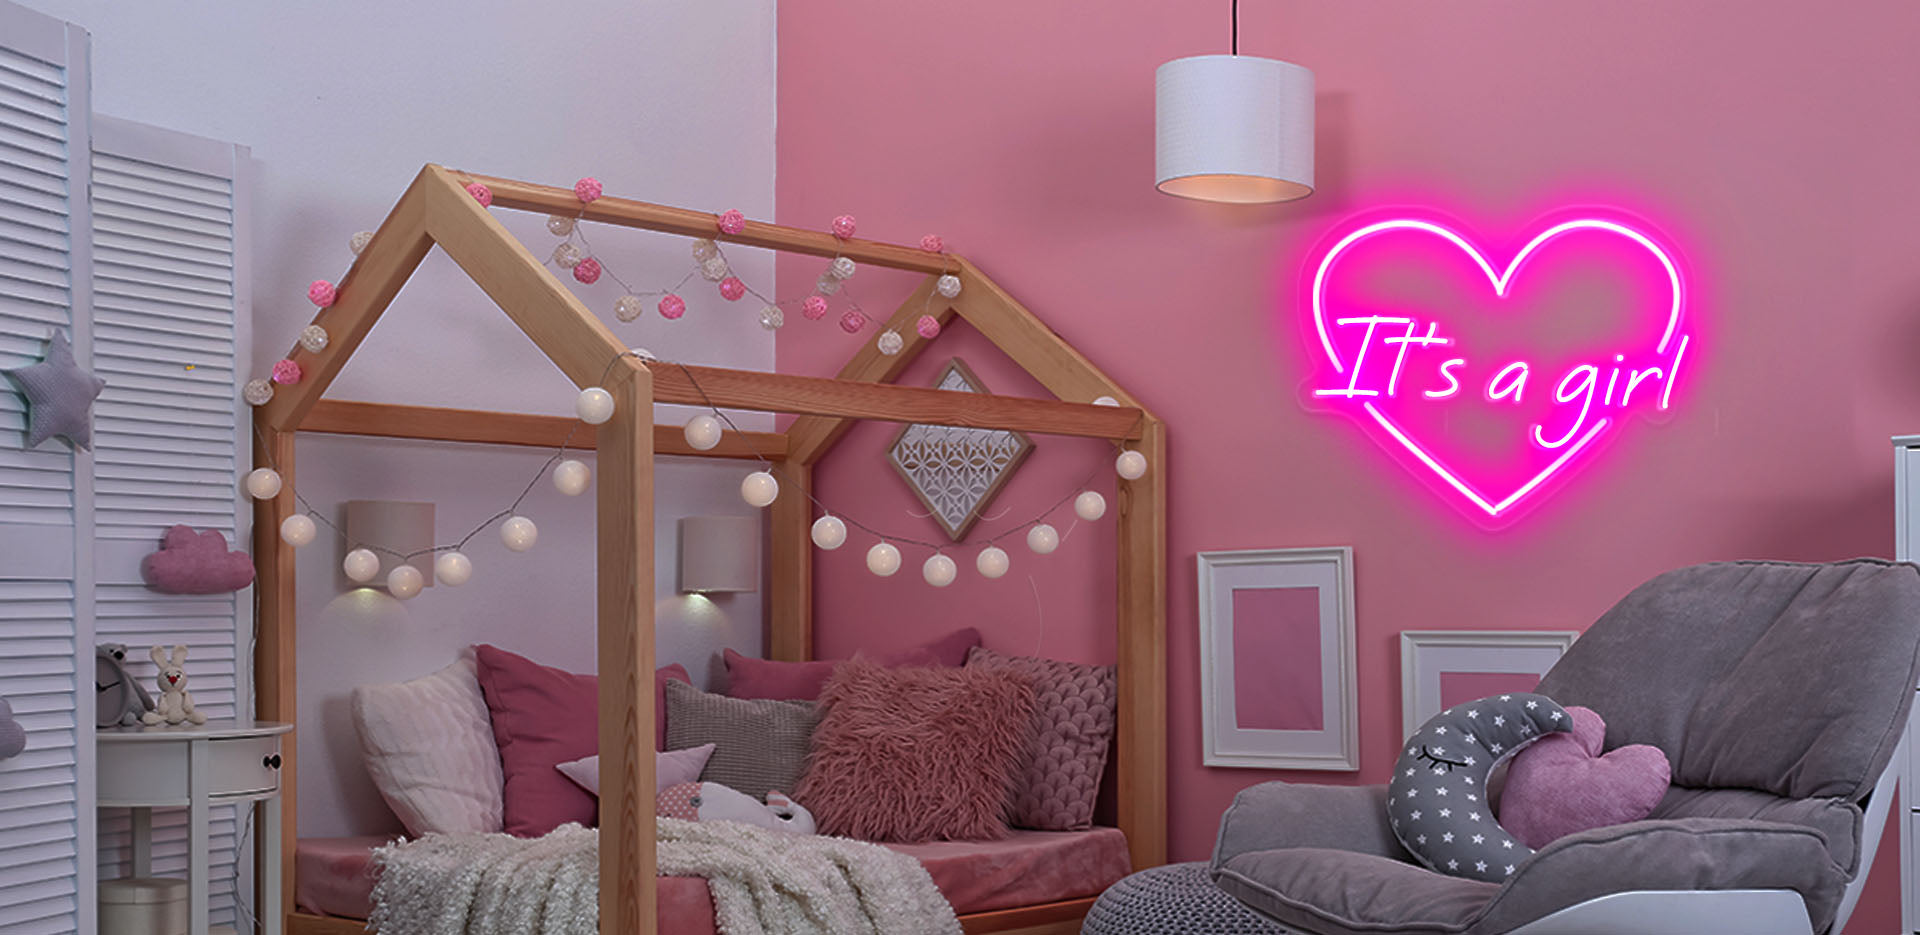 it's a girl neon sign for kids room